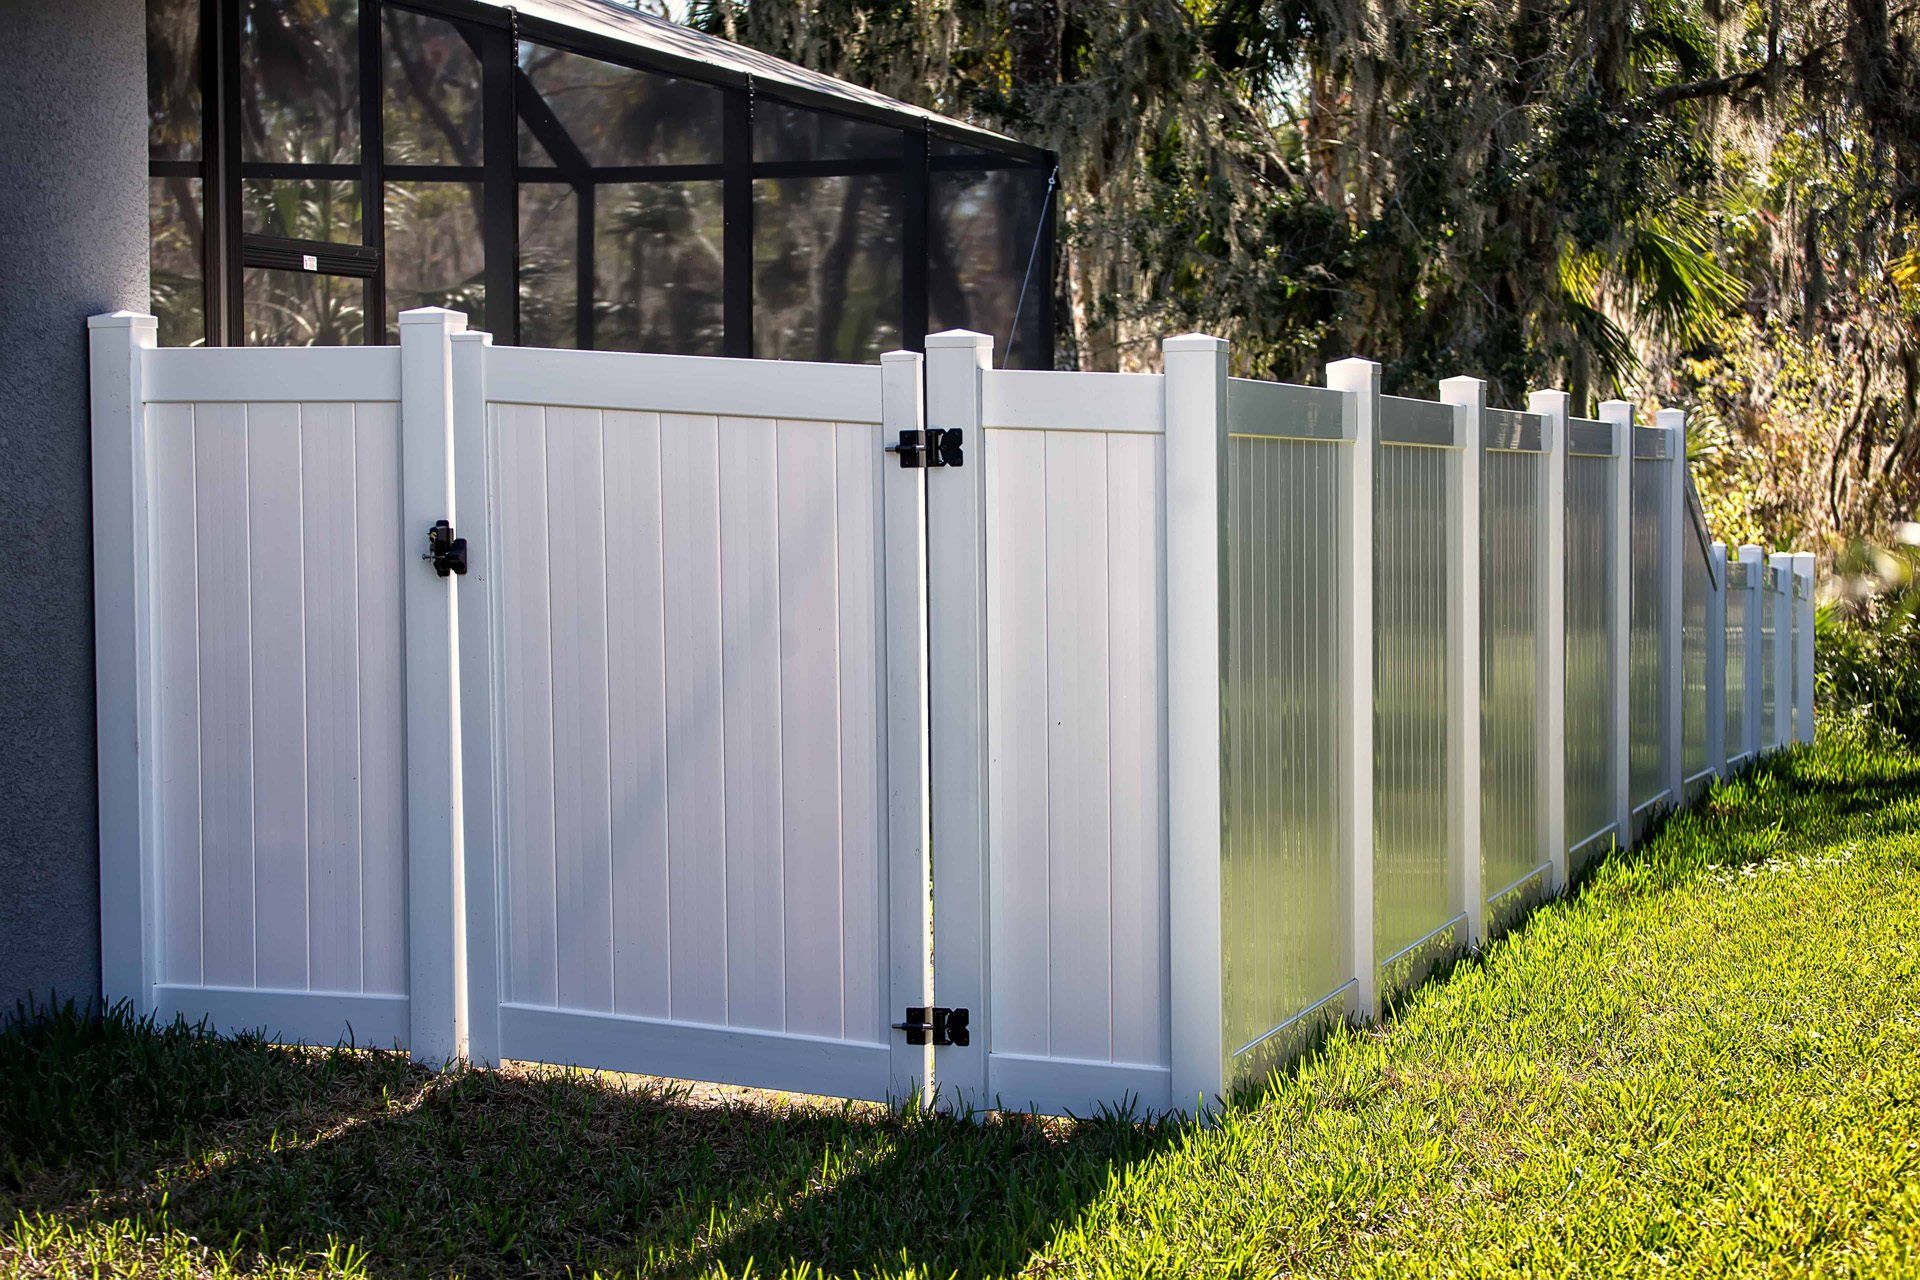 Aluminum fence is durable